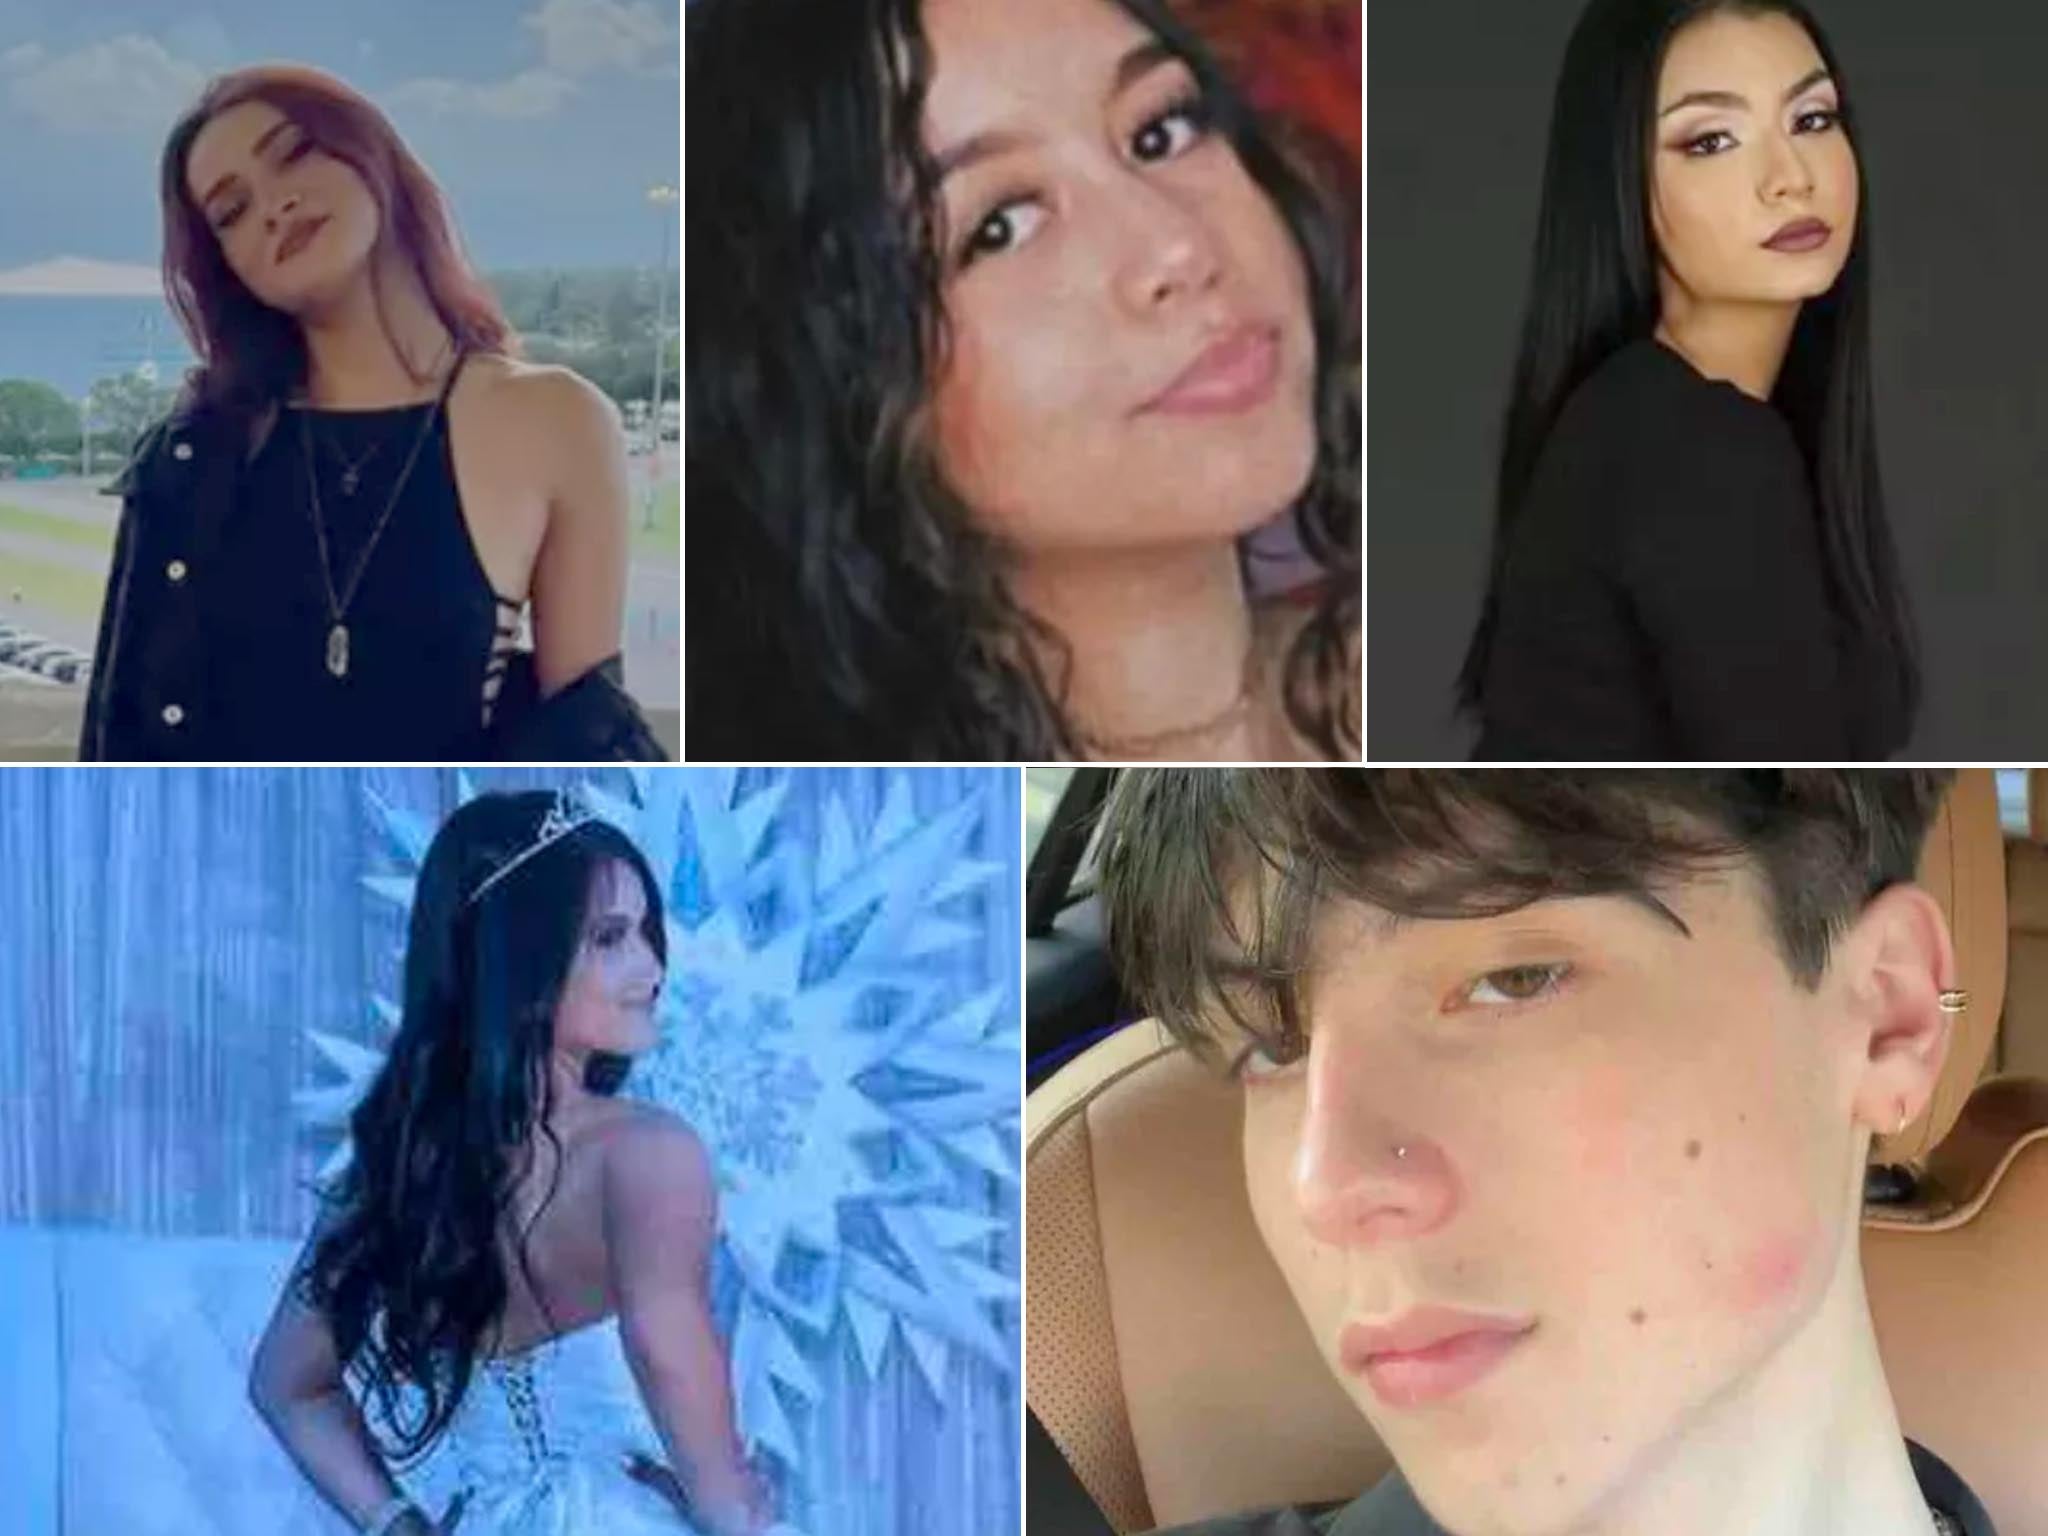 From left to right: Valeria Pena, Valeria Caceres, Daniela Marcano, Briana Pacalagua and Giancarlos Arias were all killed in a car crash on a highway outside of Miami after the driver of a car going the wrong way crashed head-on with their vehicle